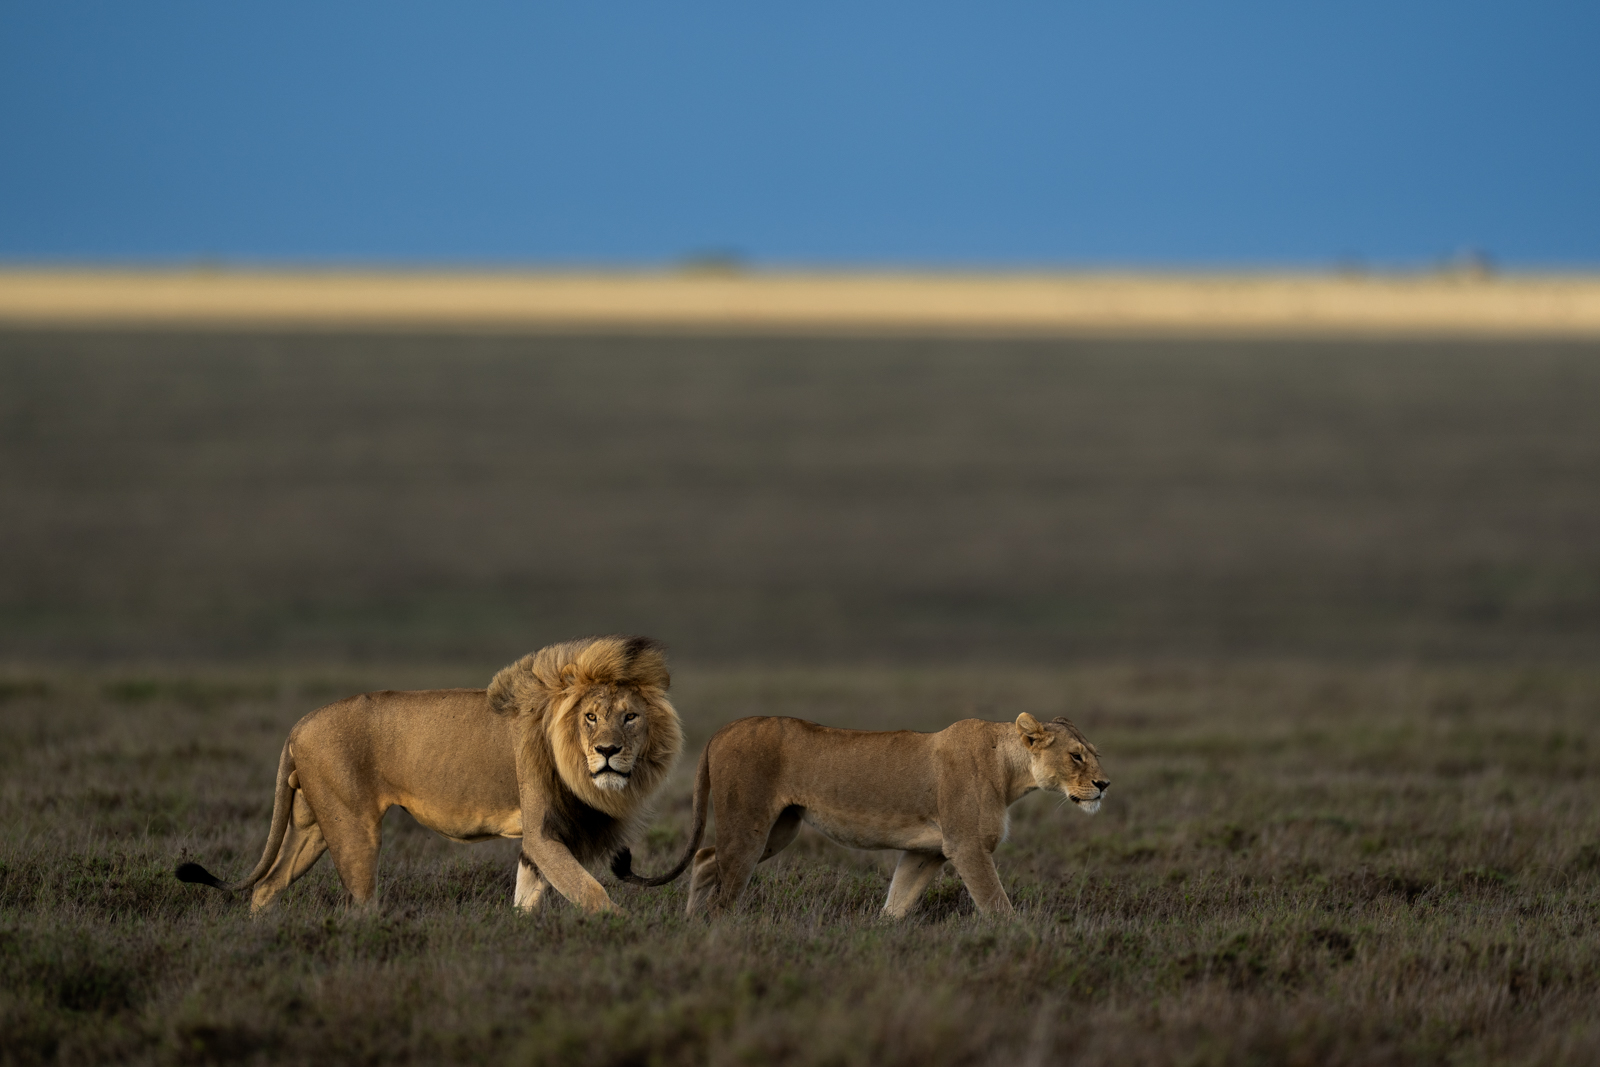 HIGH CHANCE OF SEEING LIONS IN THE SERENGETI